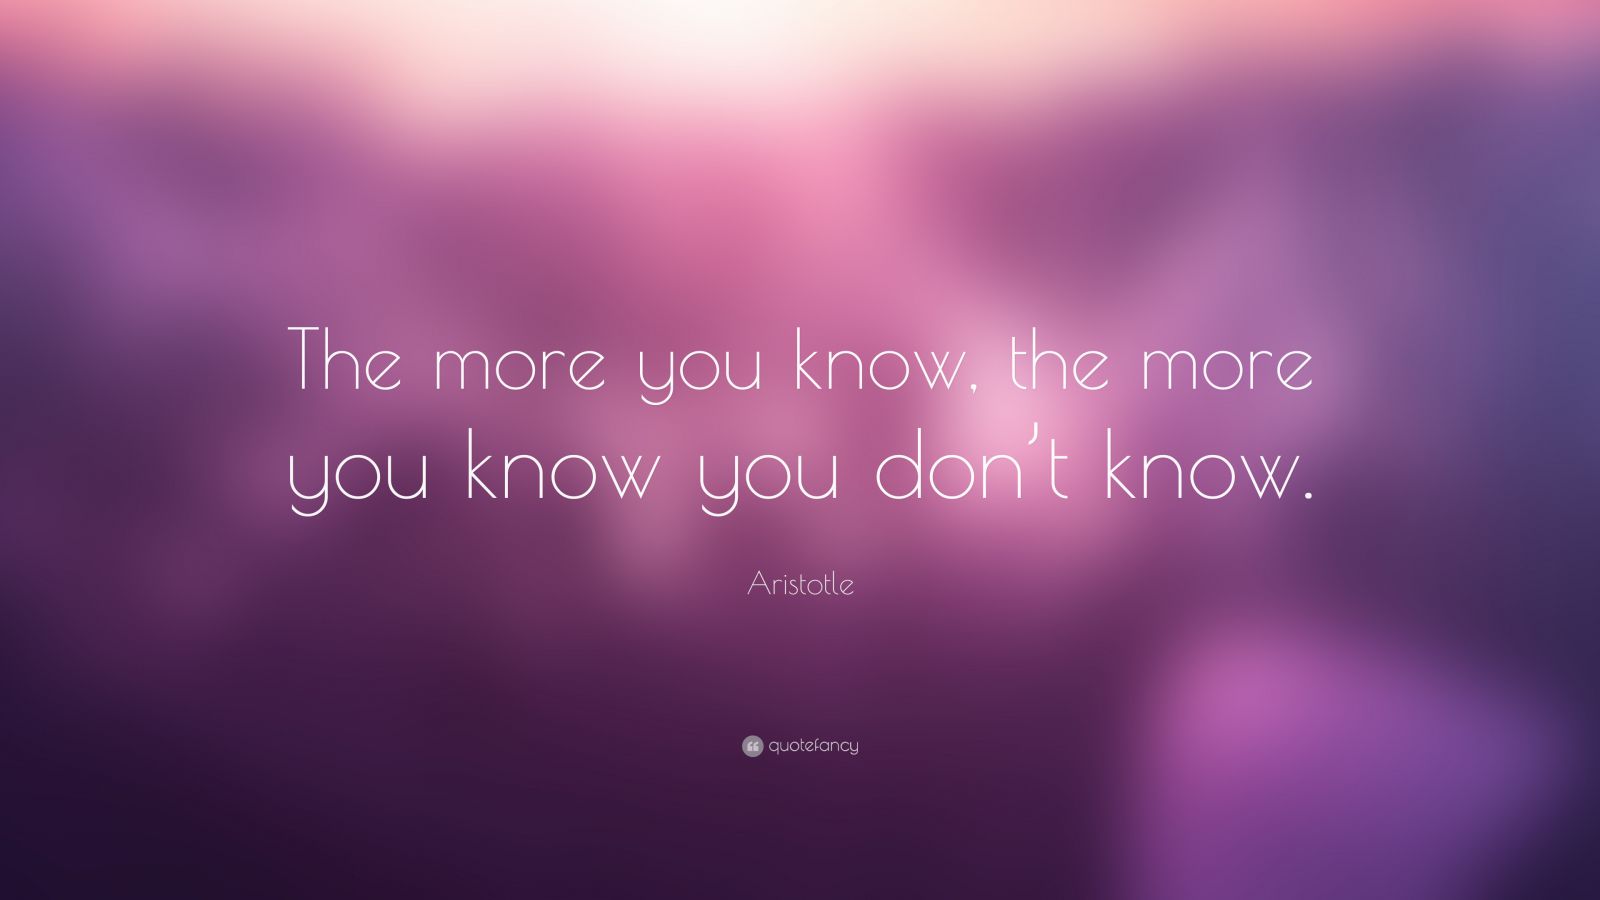 Aristotle Quote: “The more you know, the more you know you don’t know